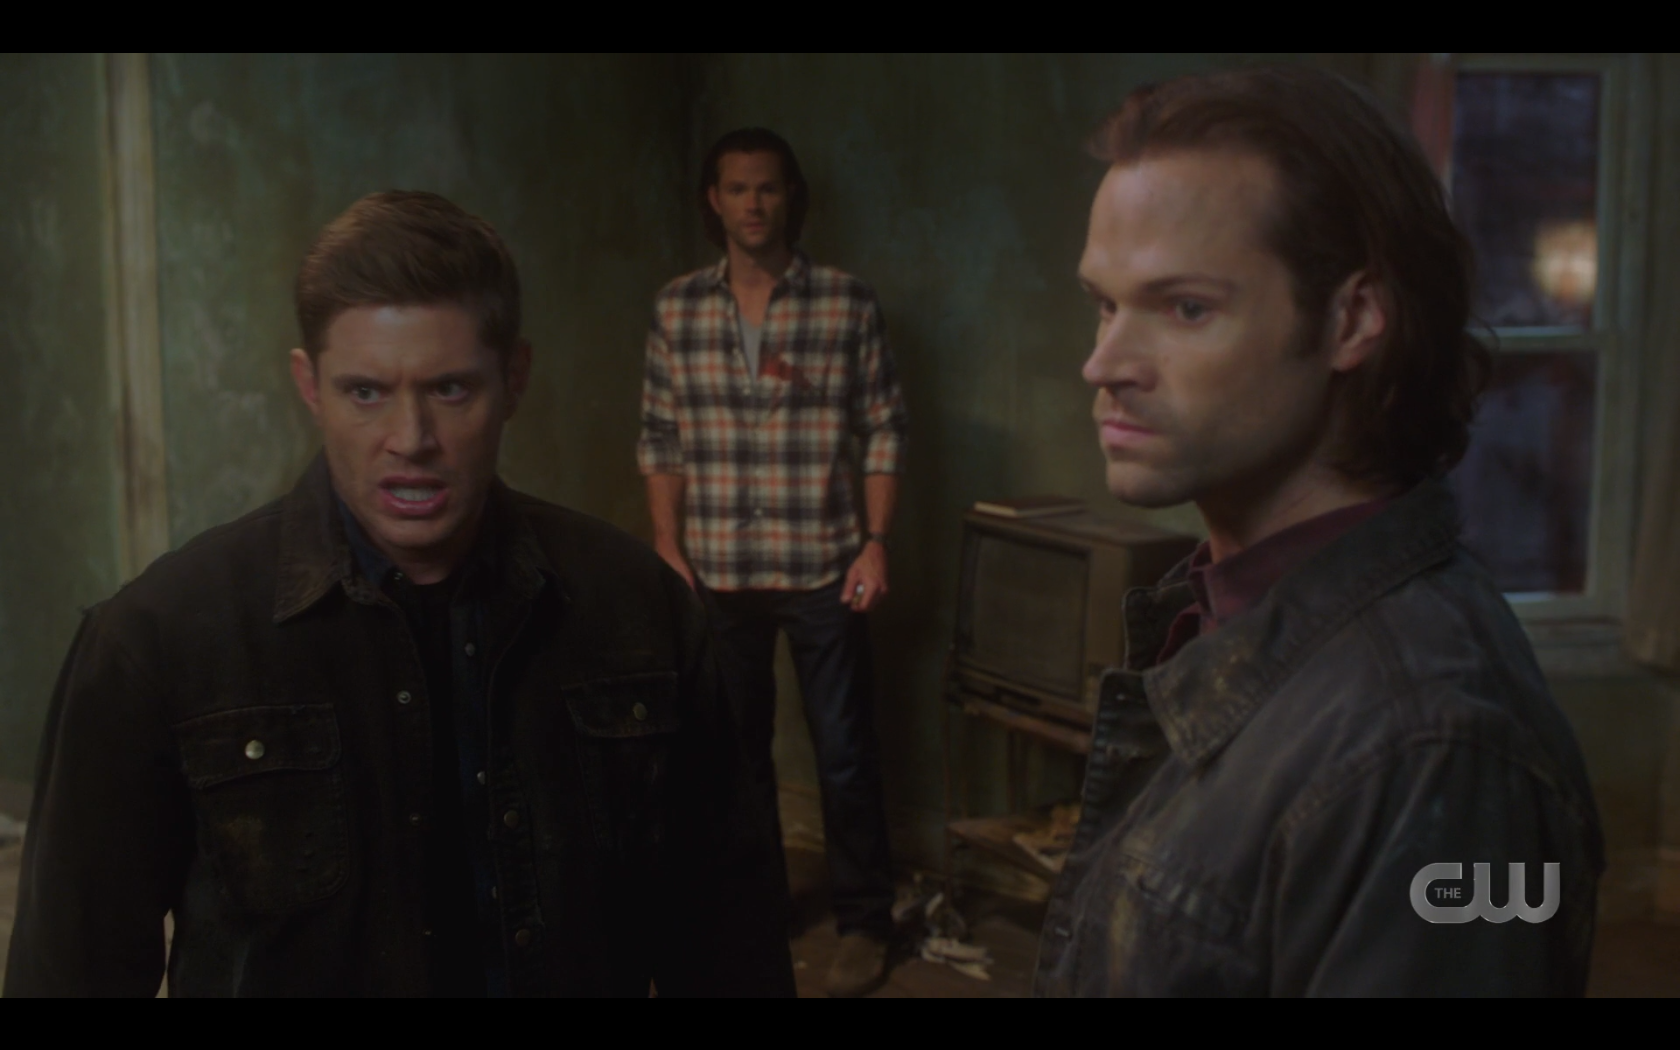 https://thewinchesterfamilybusiness.com/wp-content/CaptionThis/SPN_15x09.png